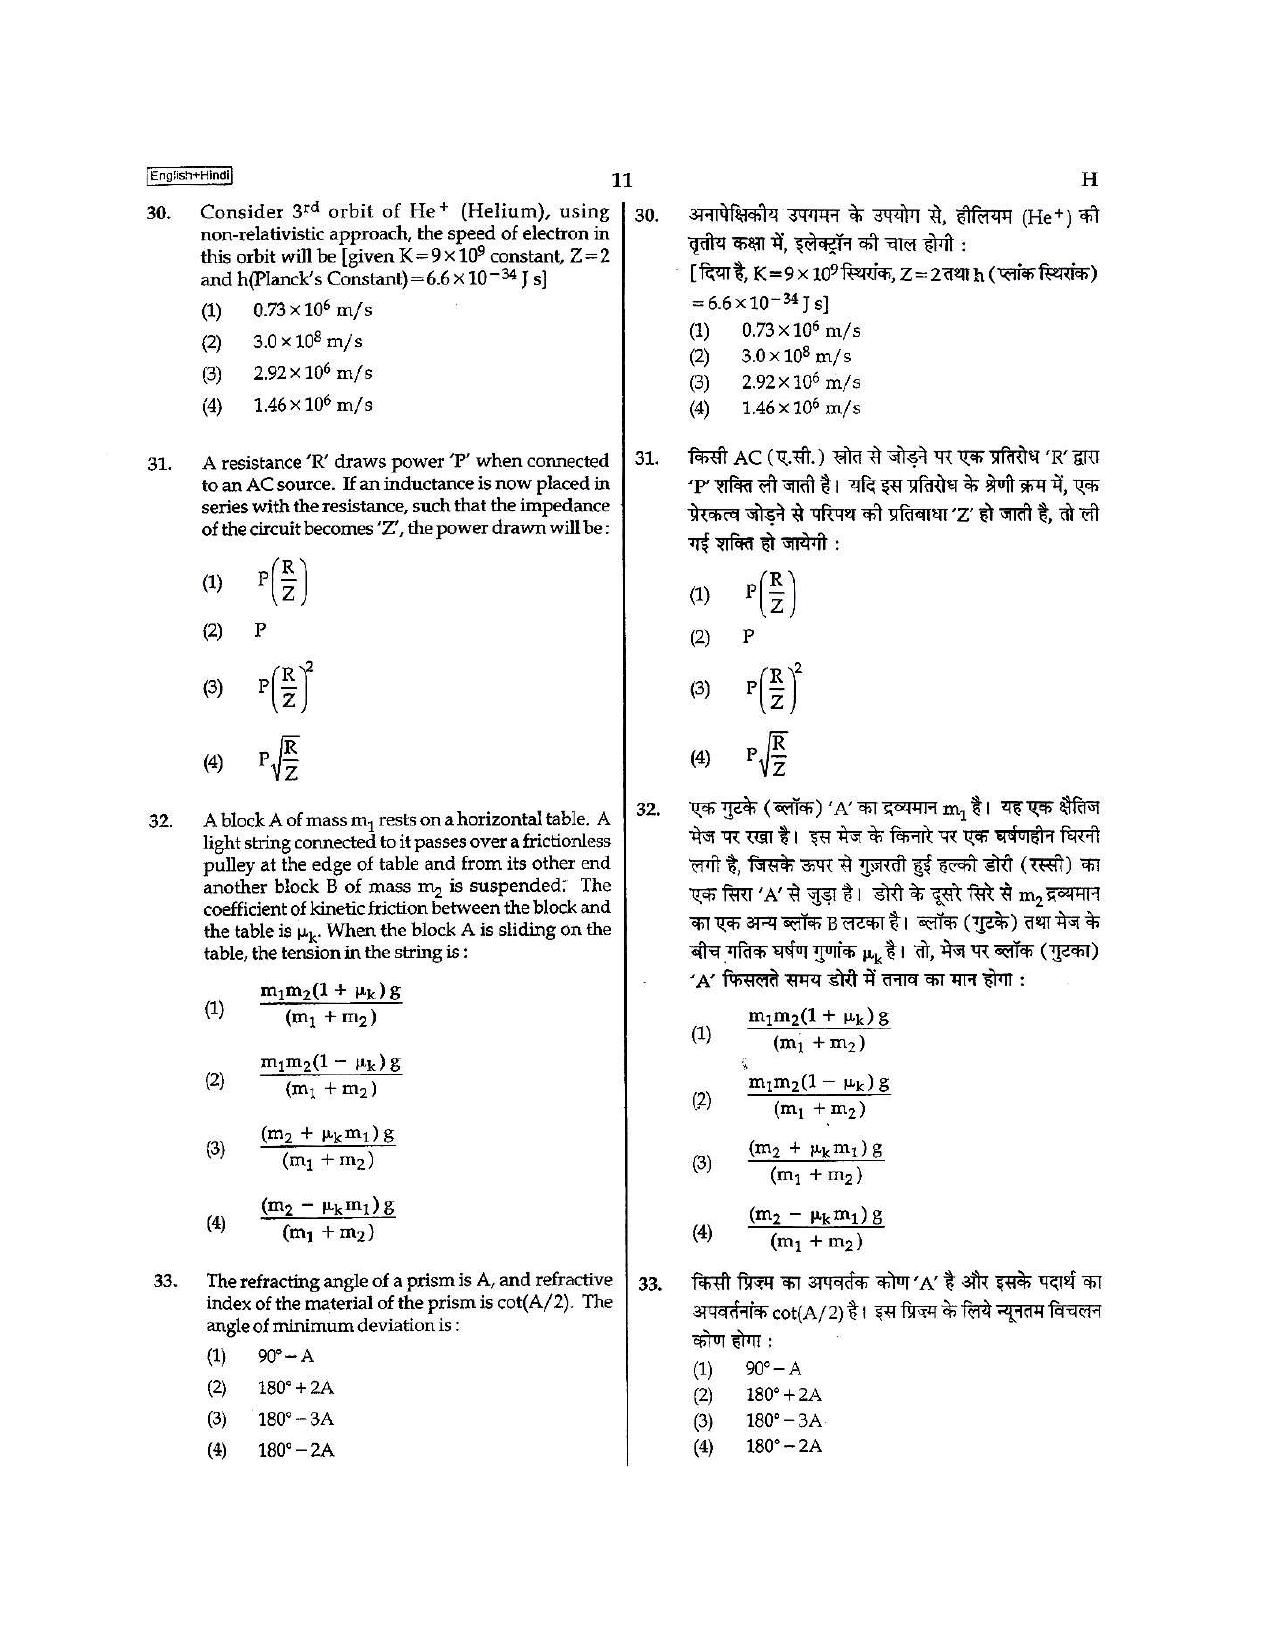 NEET Code H 2015 Question Paper - Page 11